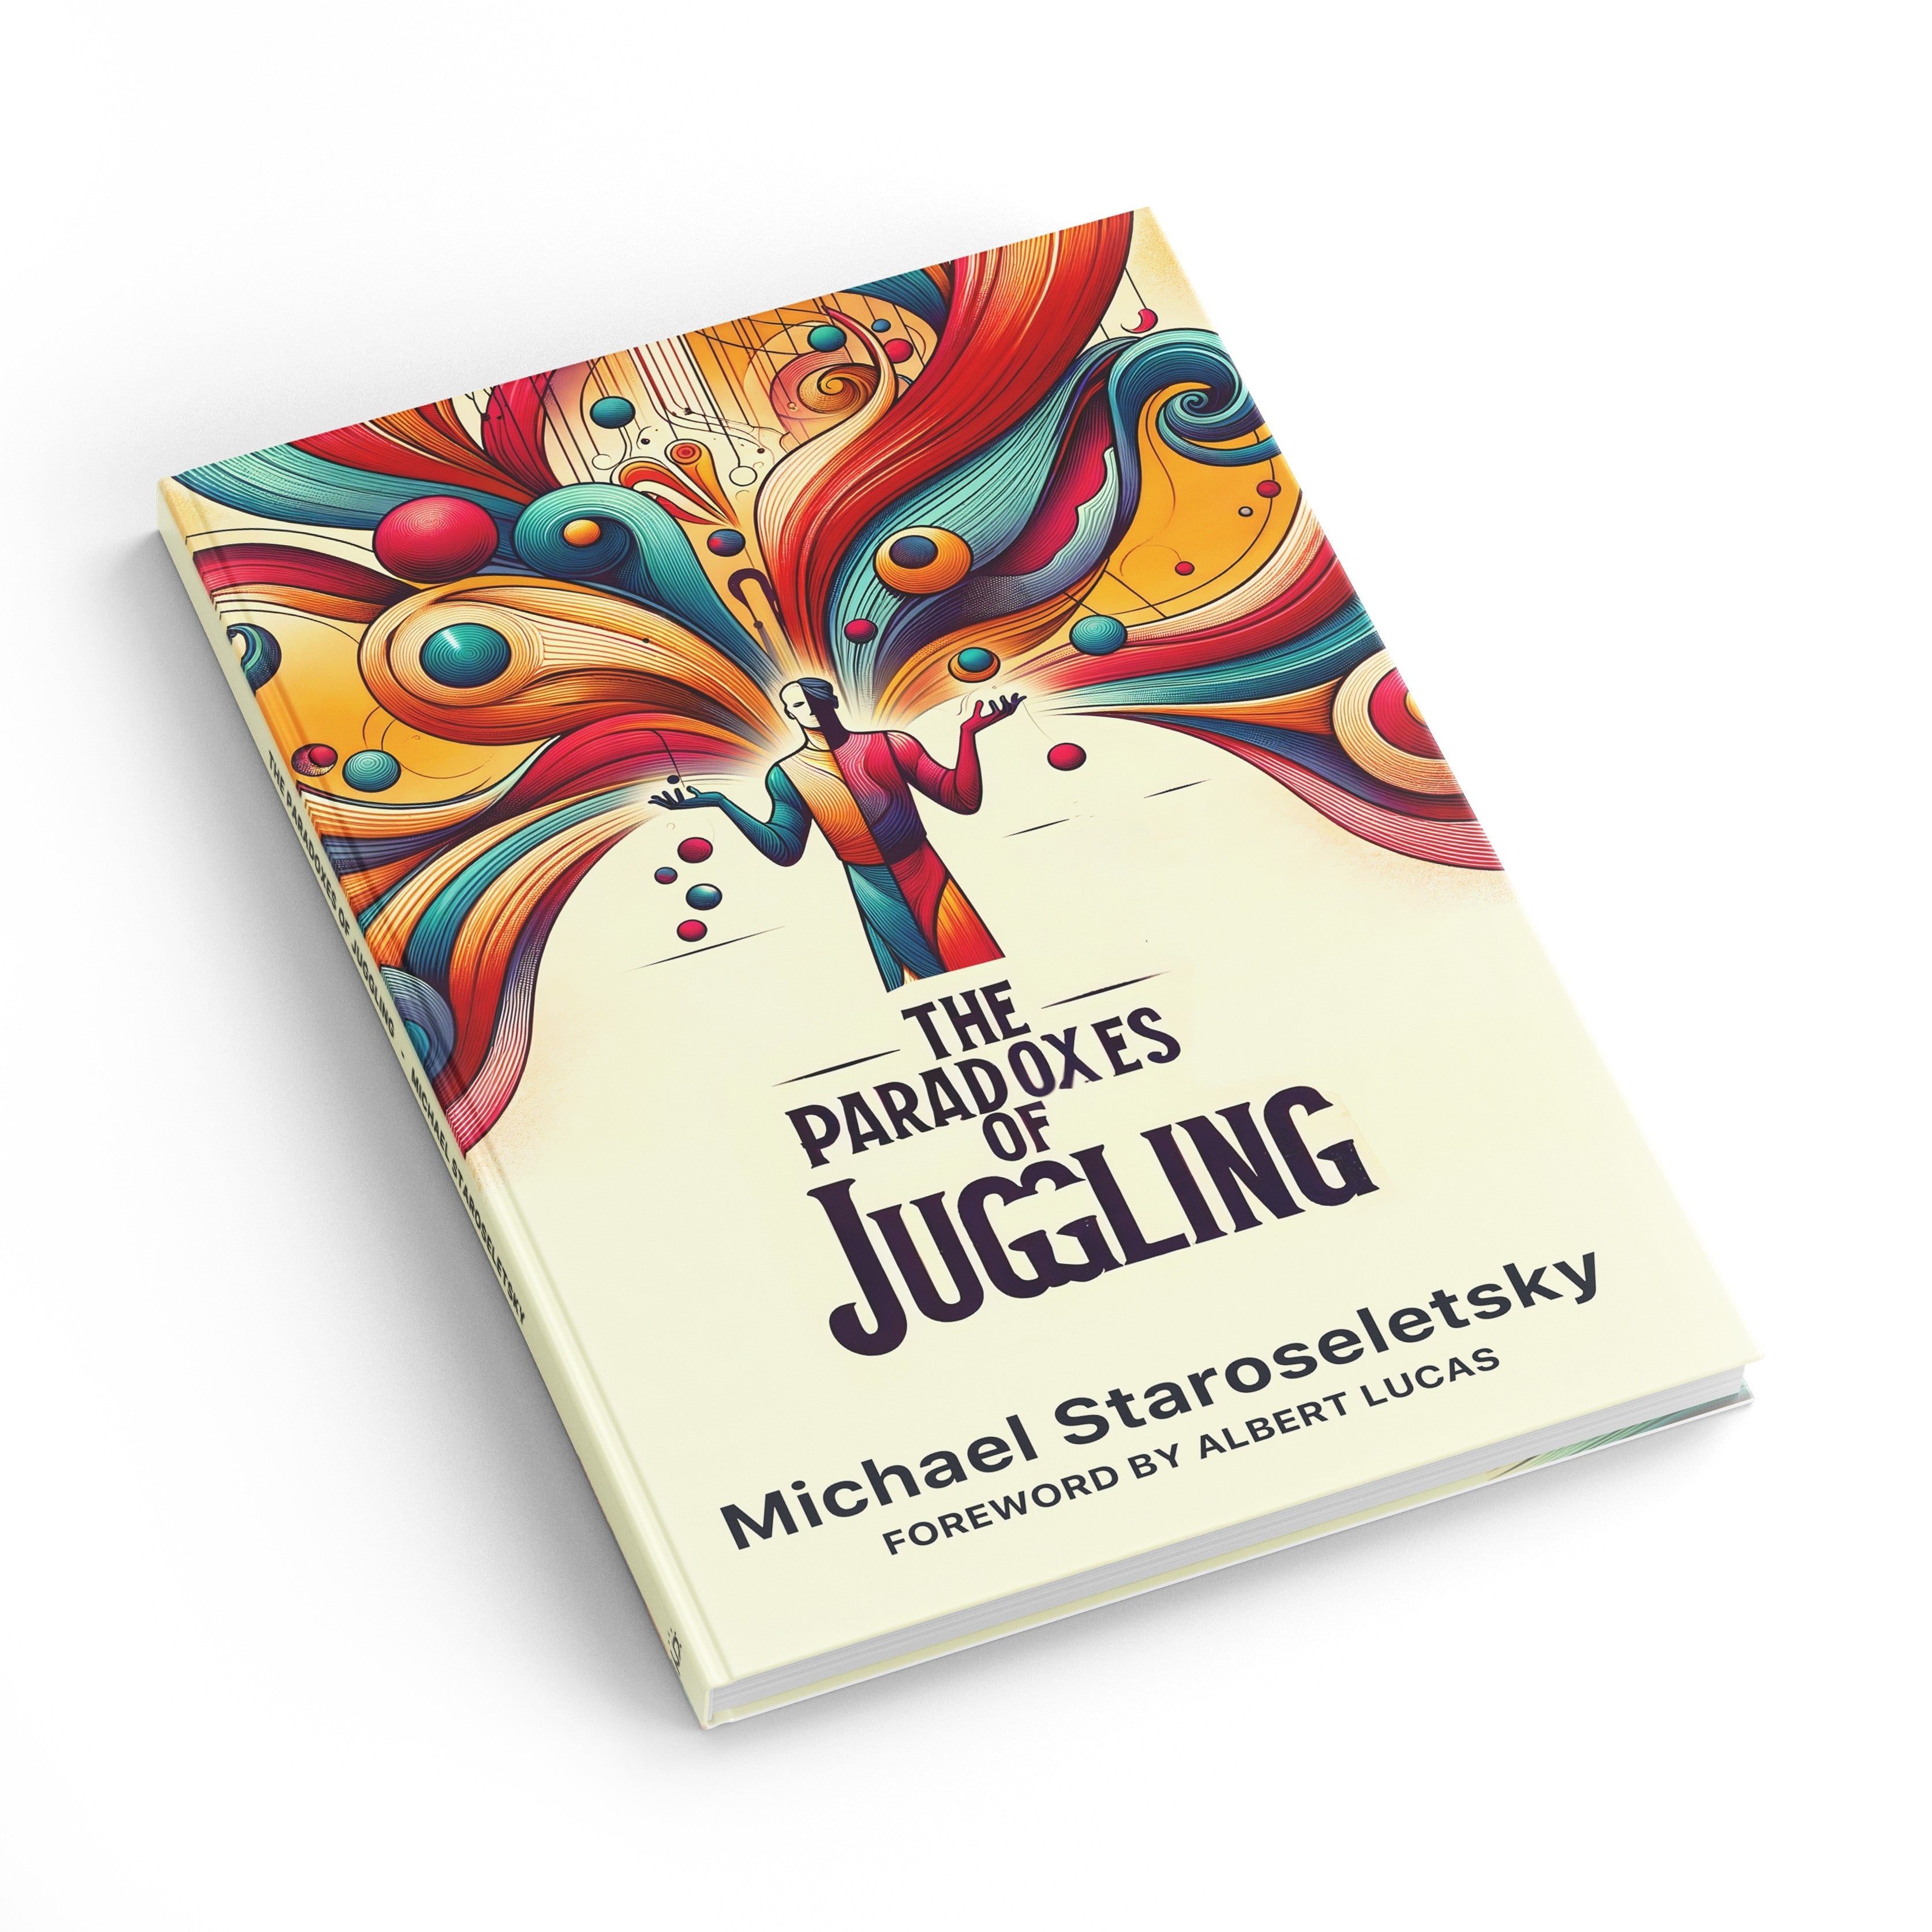 THE PARADOXES OF JUGGLING / MICHAEL STAROSELETSKY BOOK